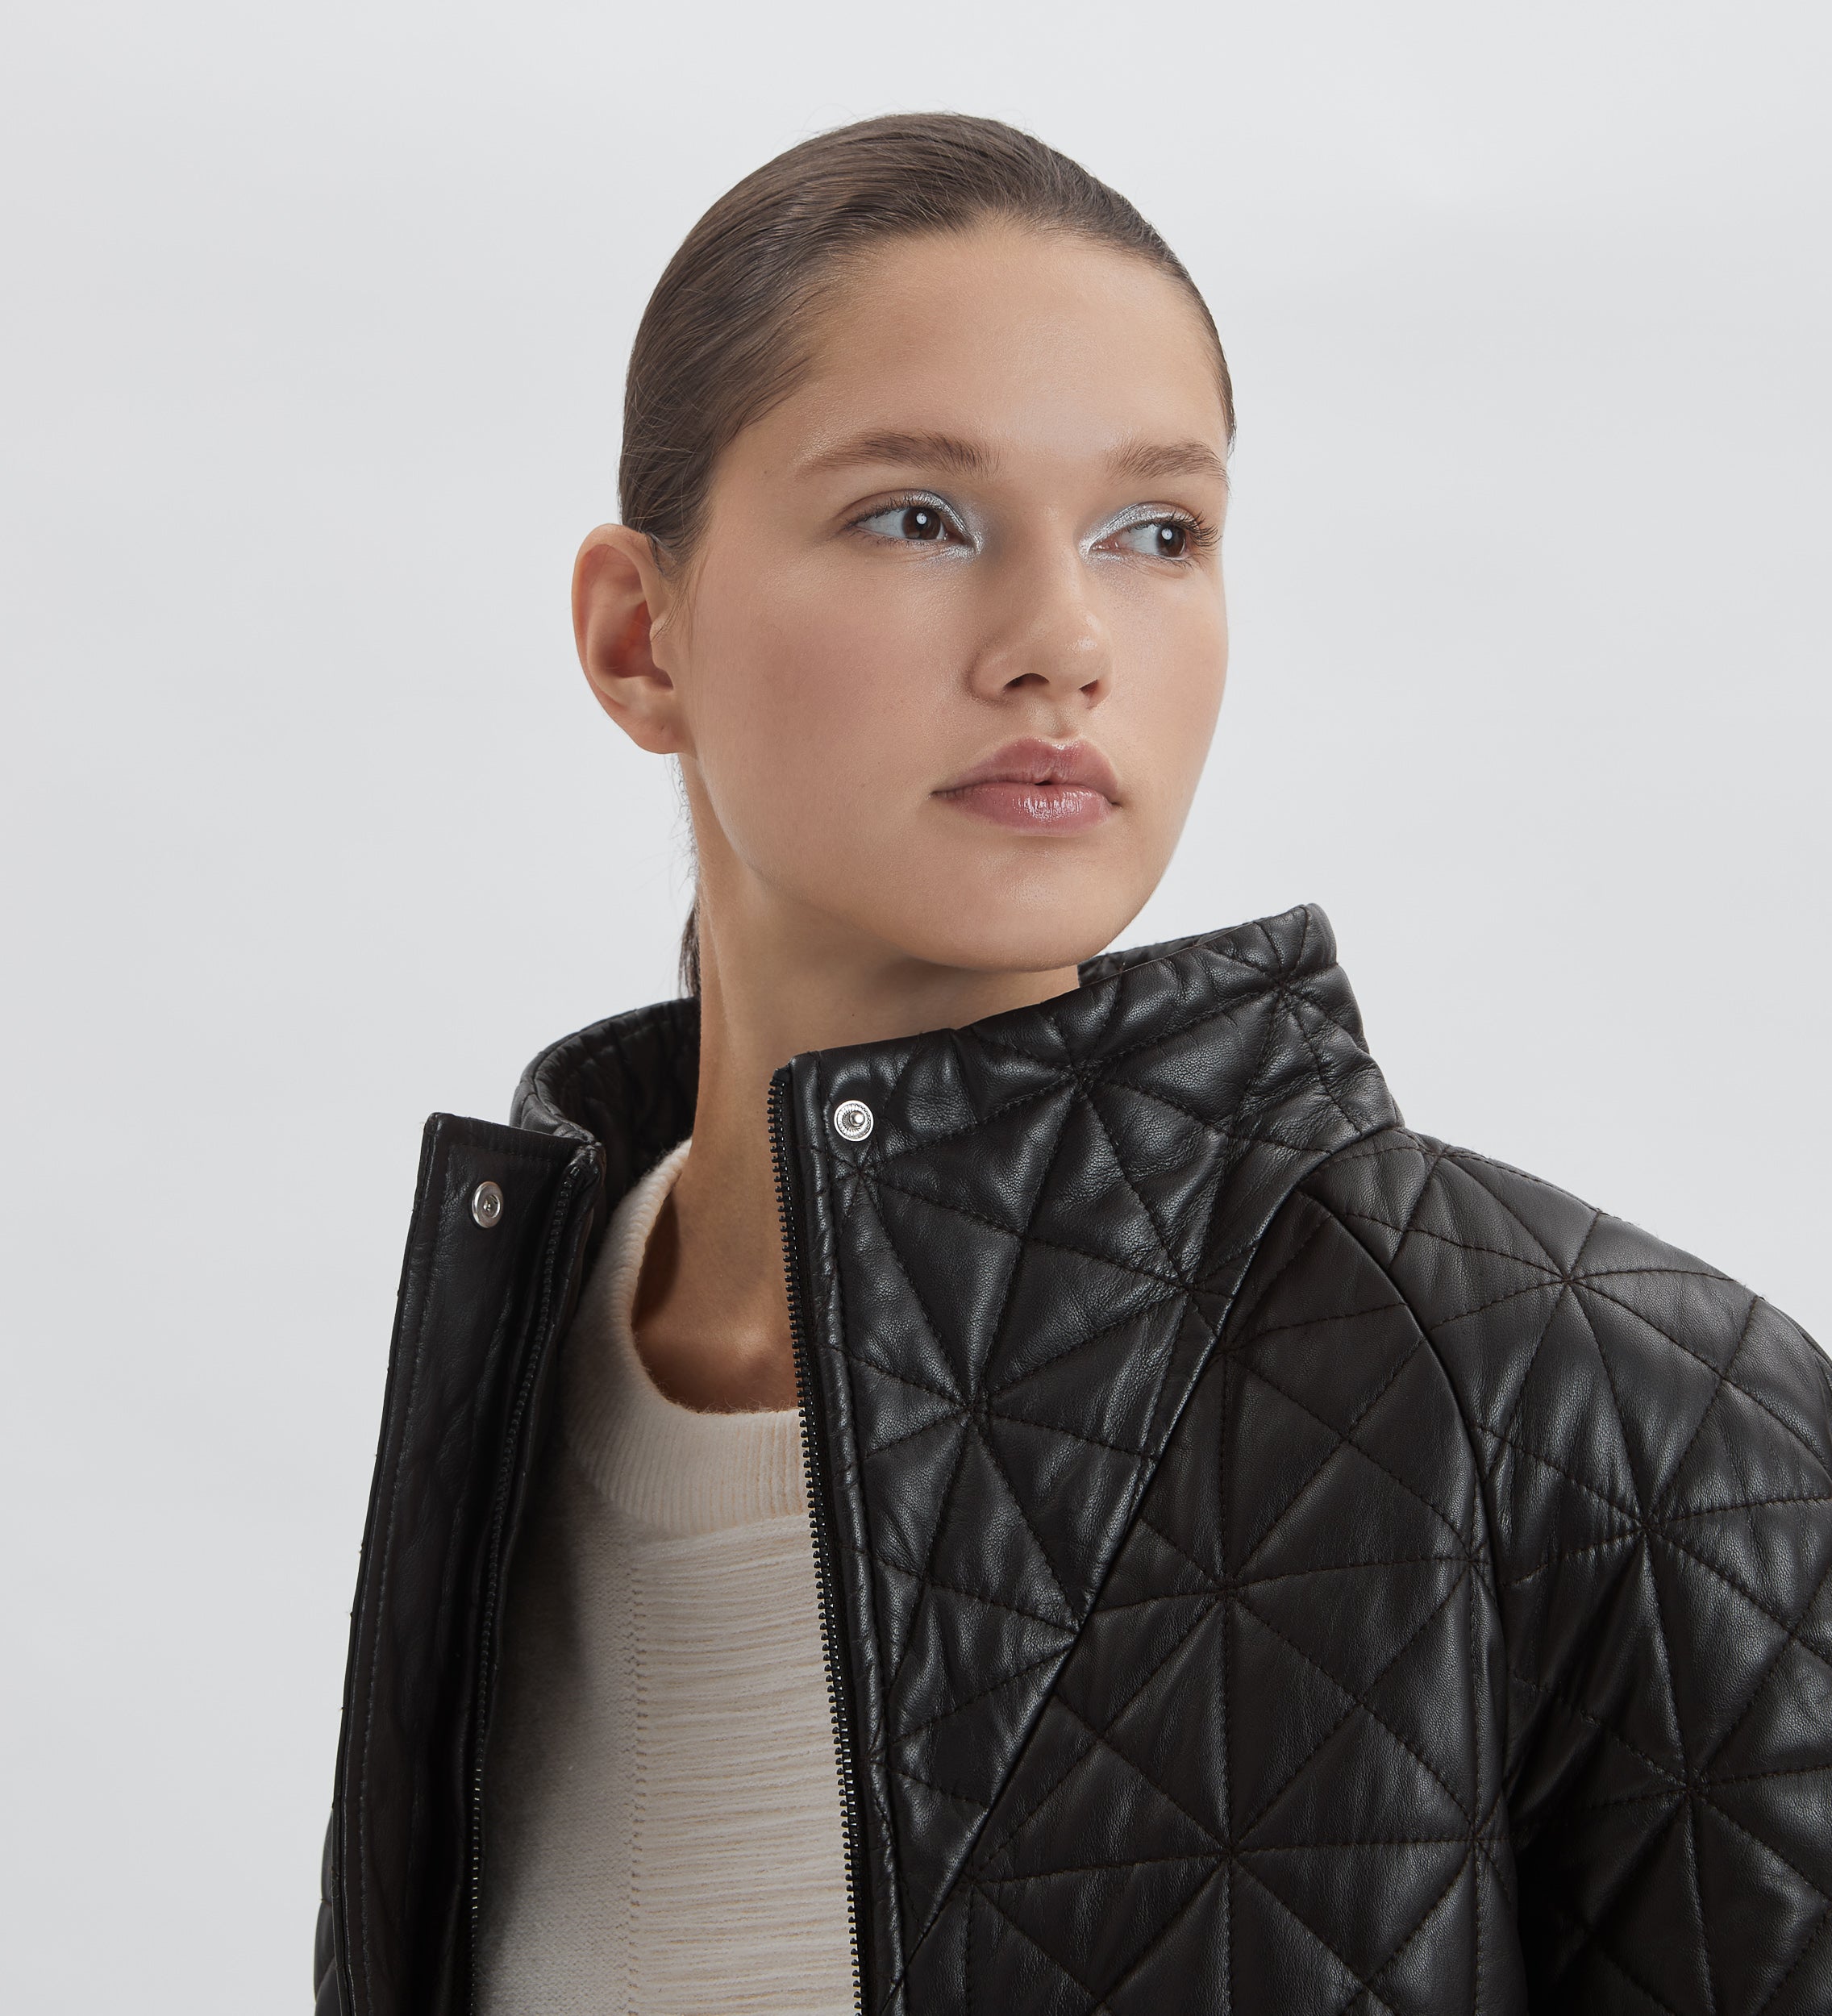 Quilted nappa parka